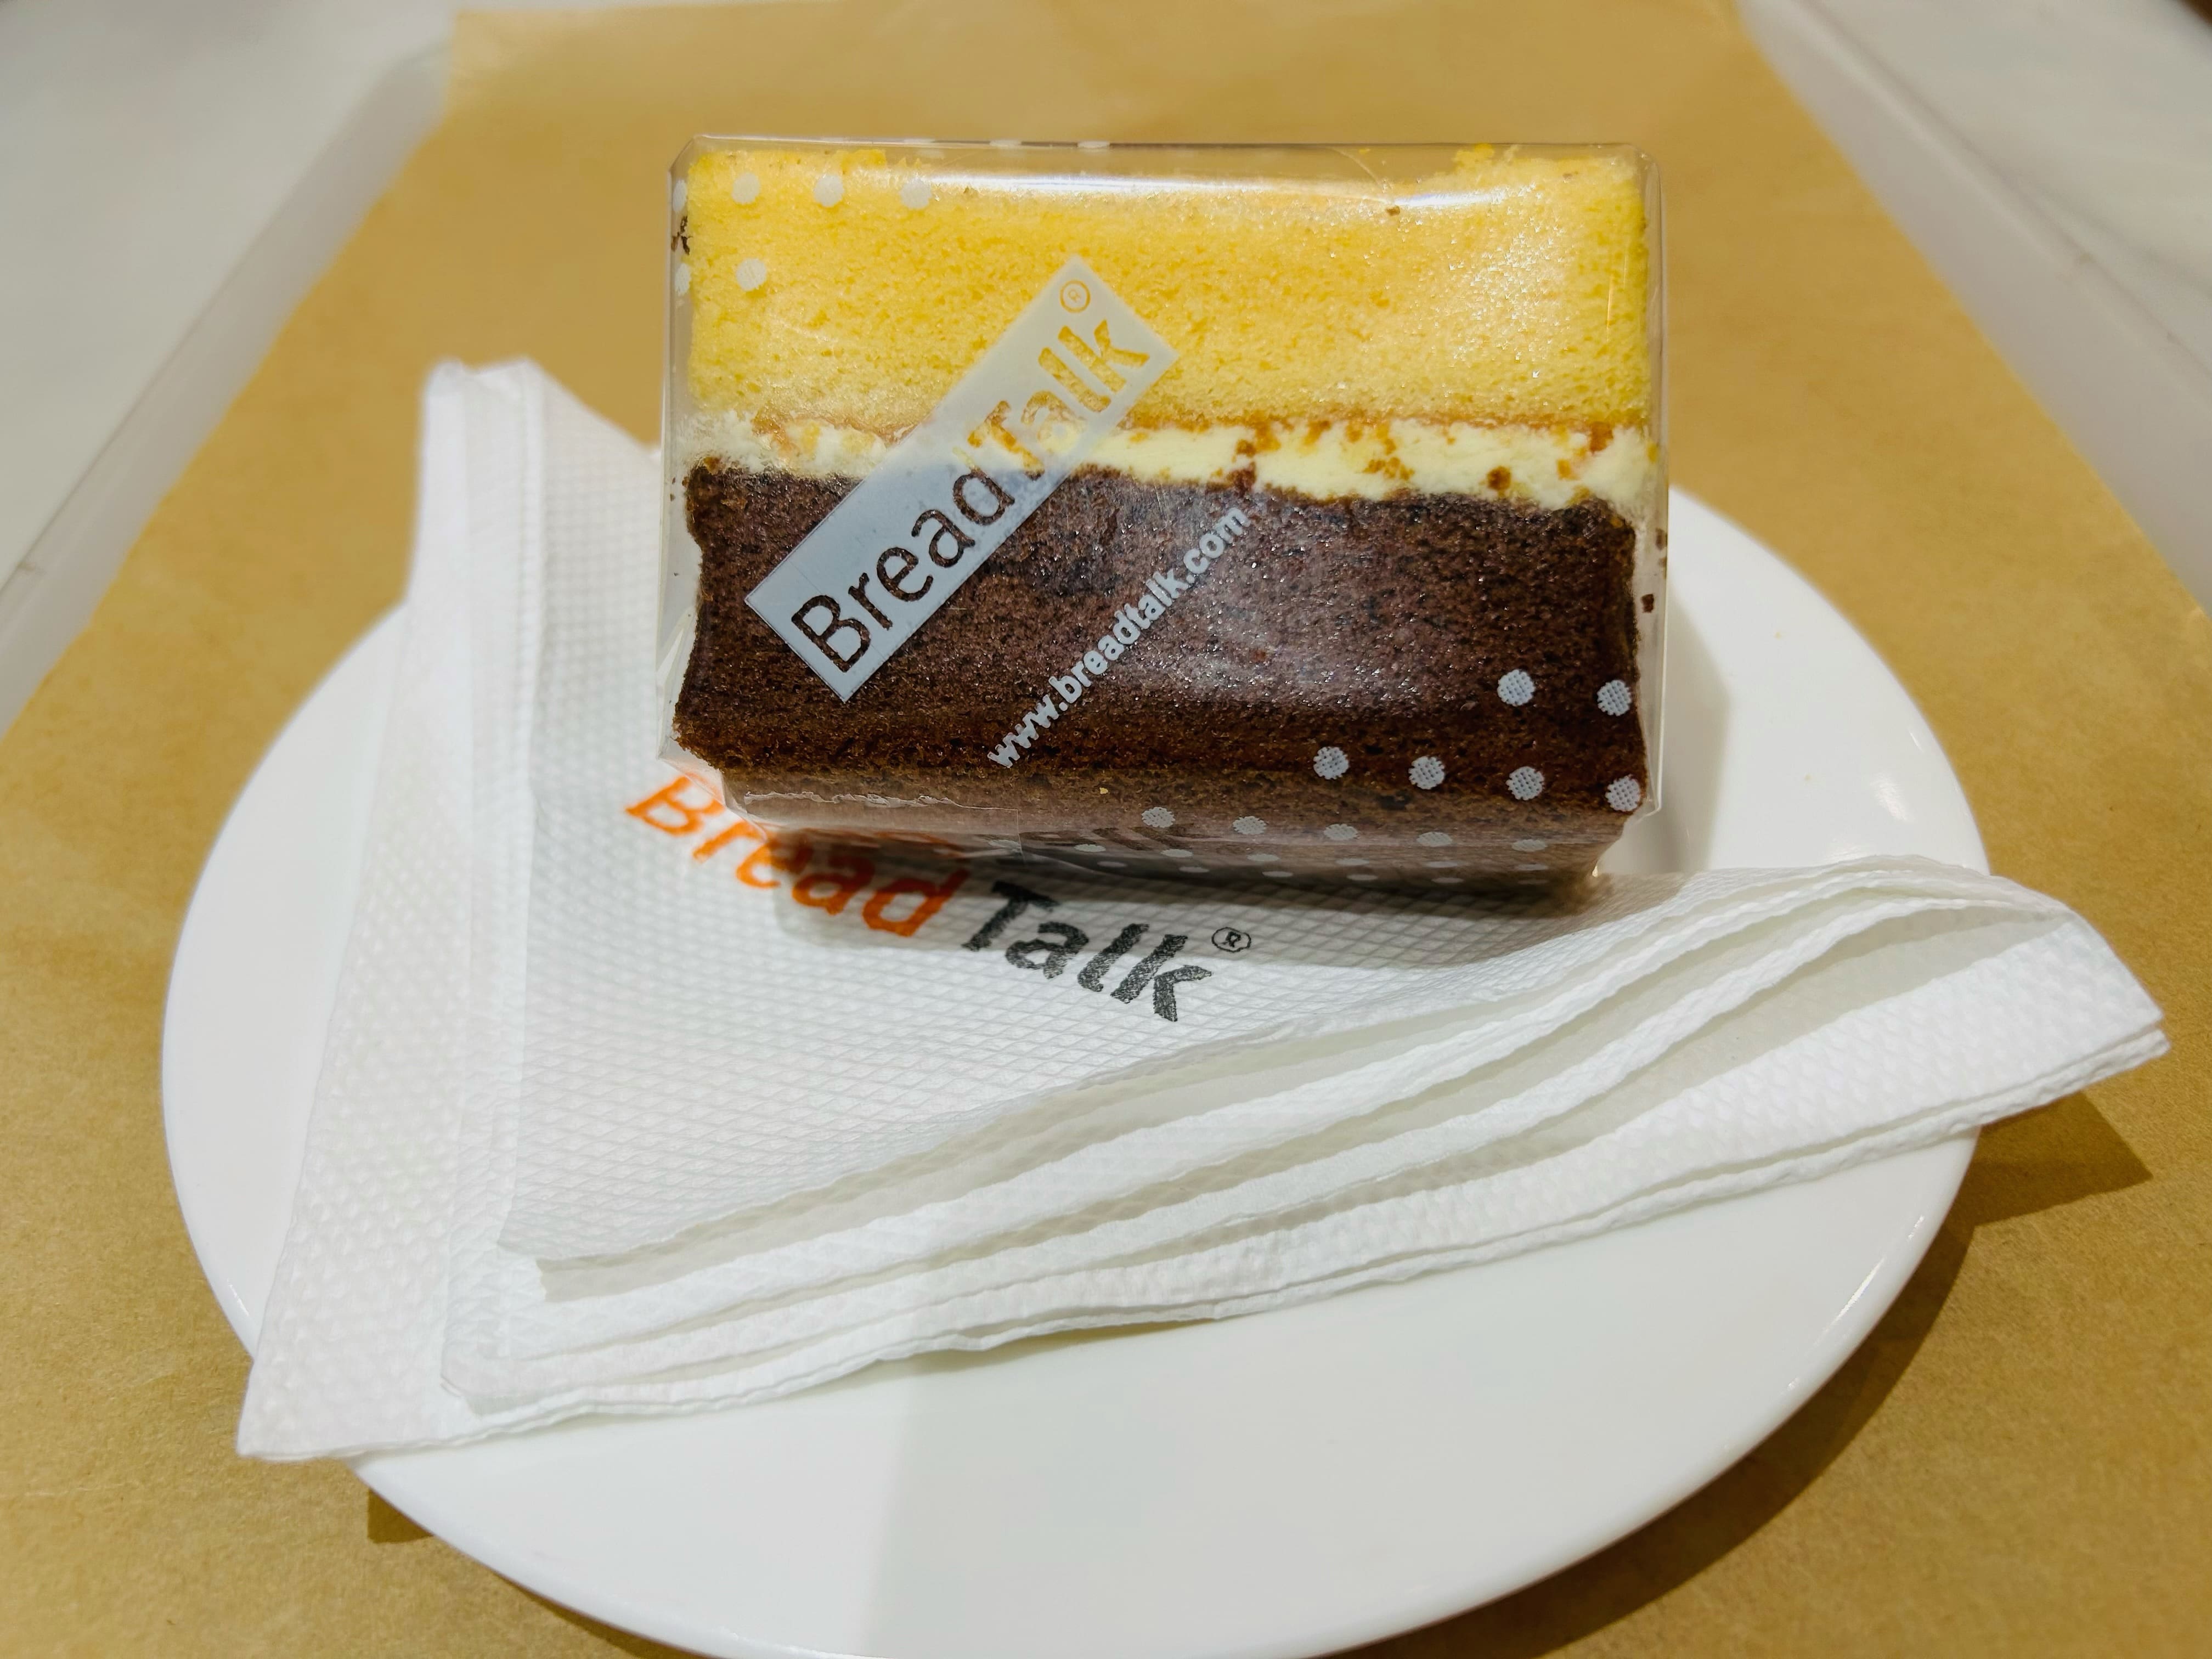 BreadTalk Launches 22nd Anniversary Menu With Items Like Milk Swiss Roll  Special Promotions